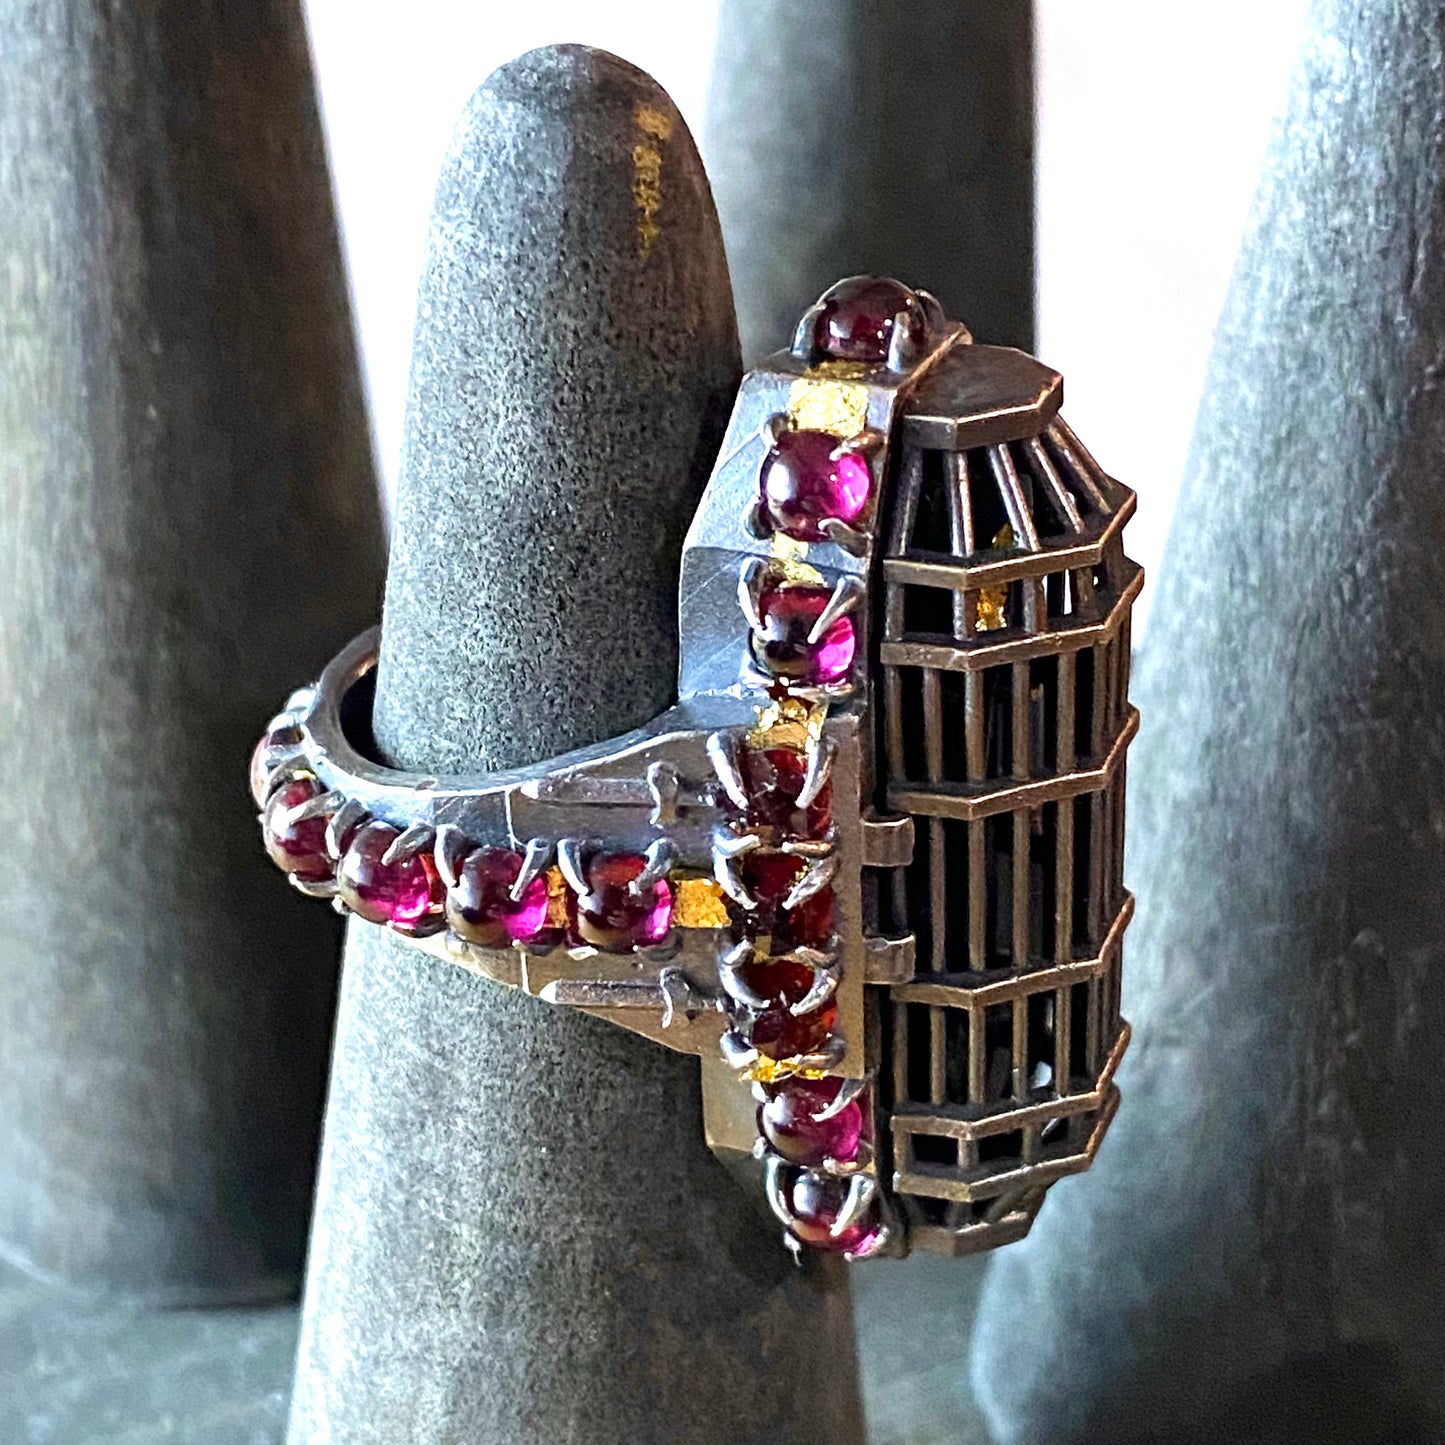 Carthusian’s Soul Carved Black Coral Monk Figure Iron Maiden Ring in Sterling Silver With Garnets and 23kt Gold leaf